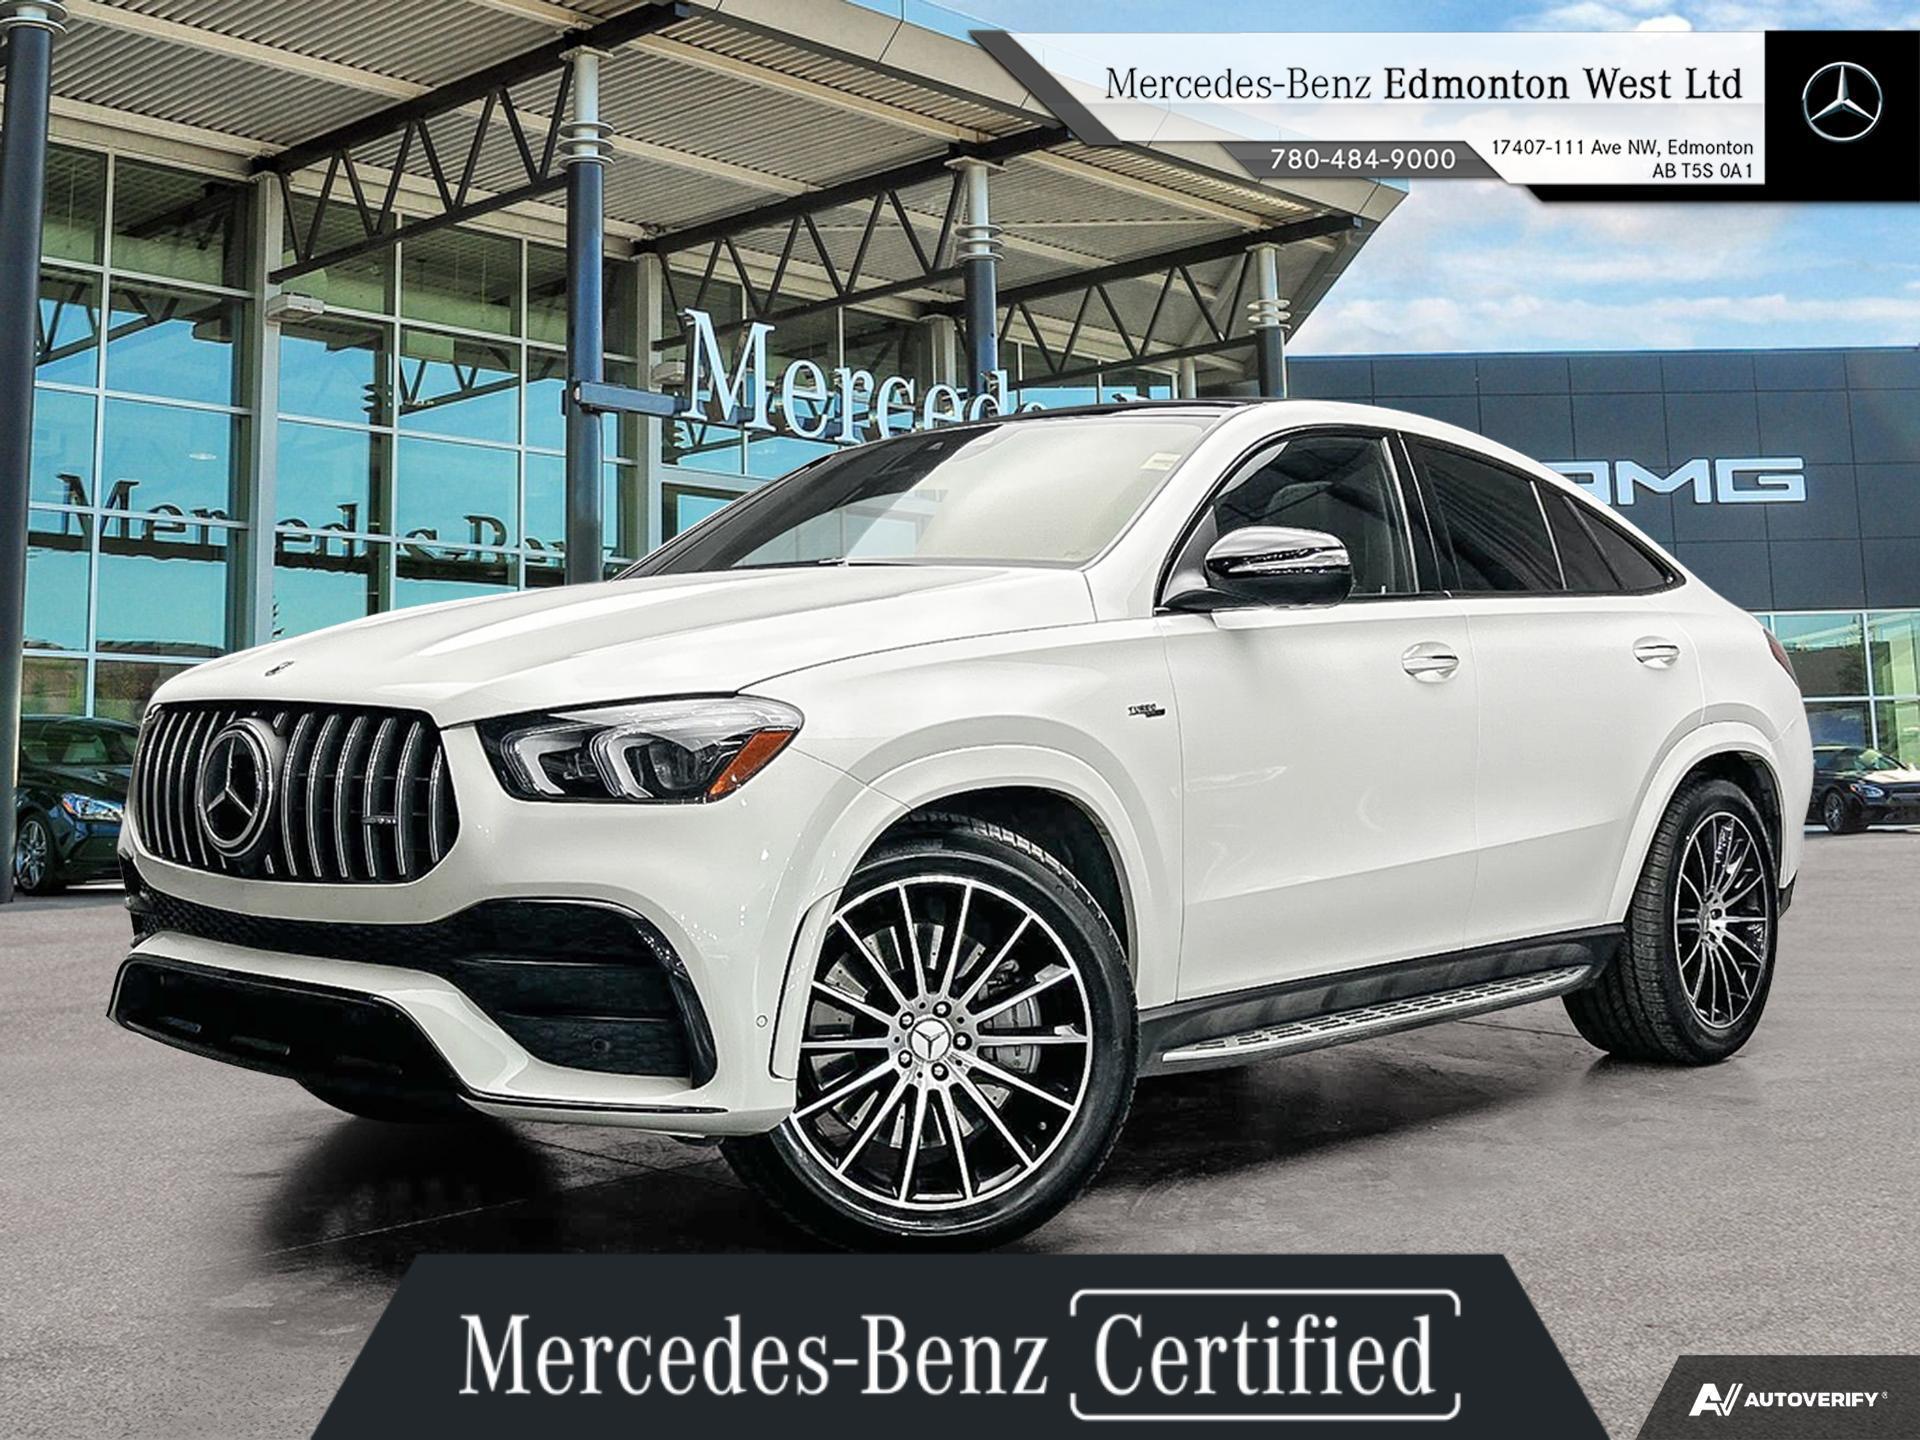 2021 Mercedes-Benz GLE 53 AMG 4MATIC+ Coupe  - Low Kms - 429HP AMG I6 Tur